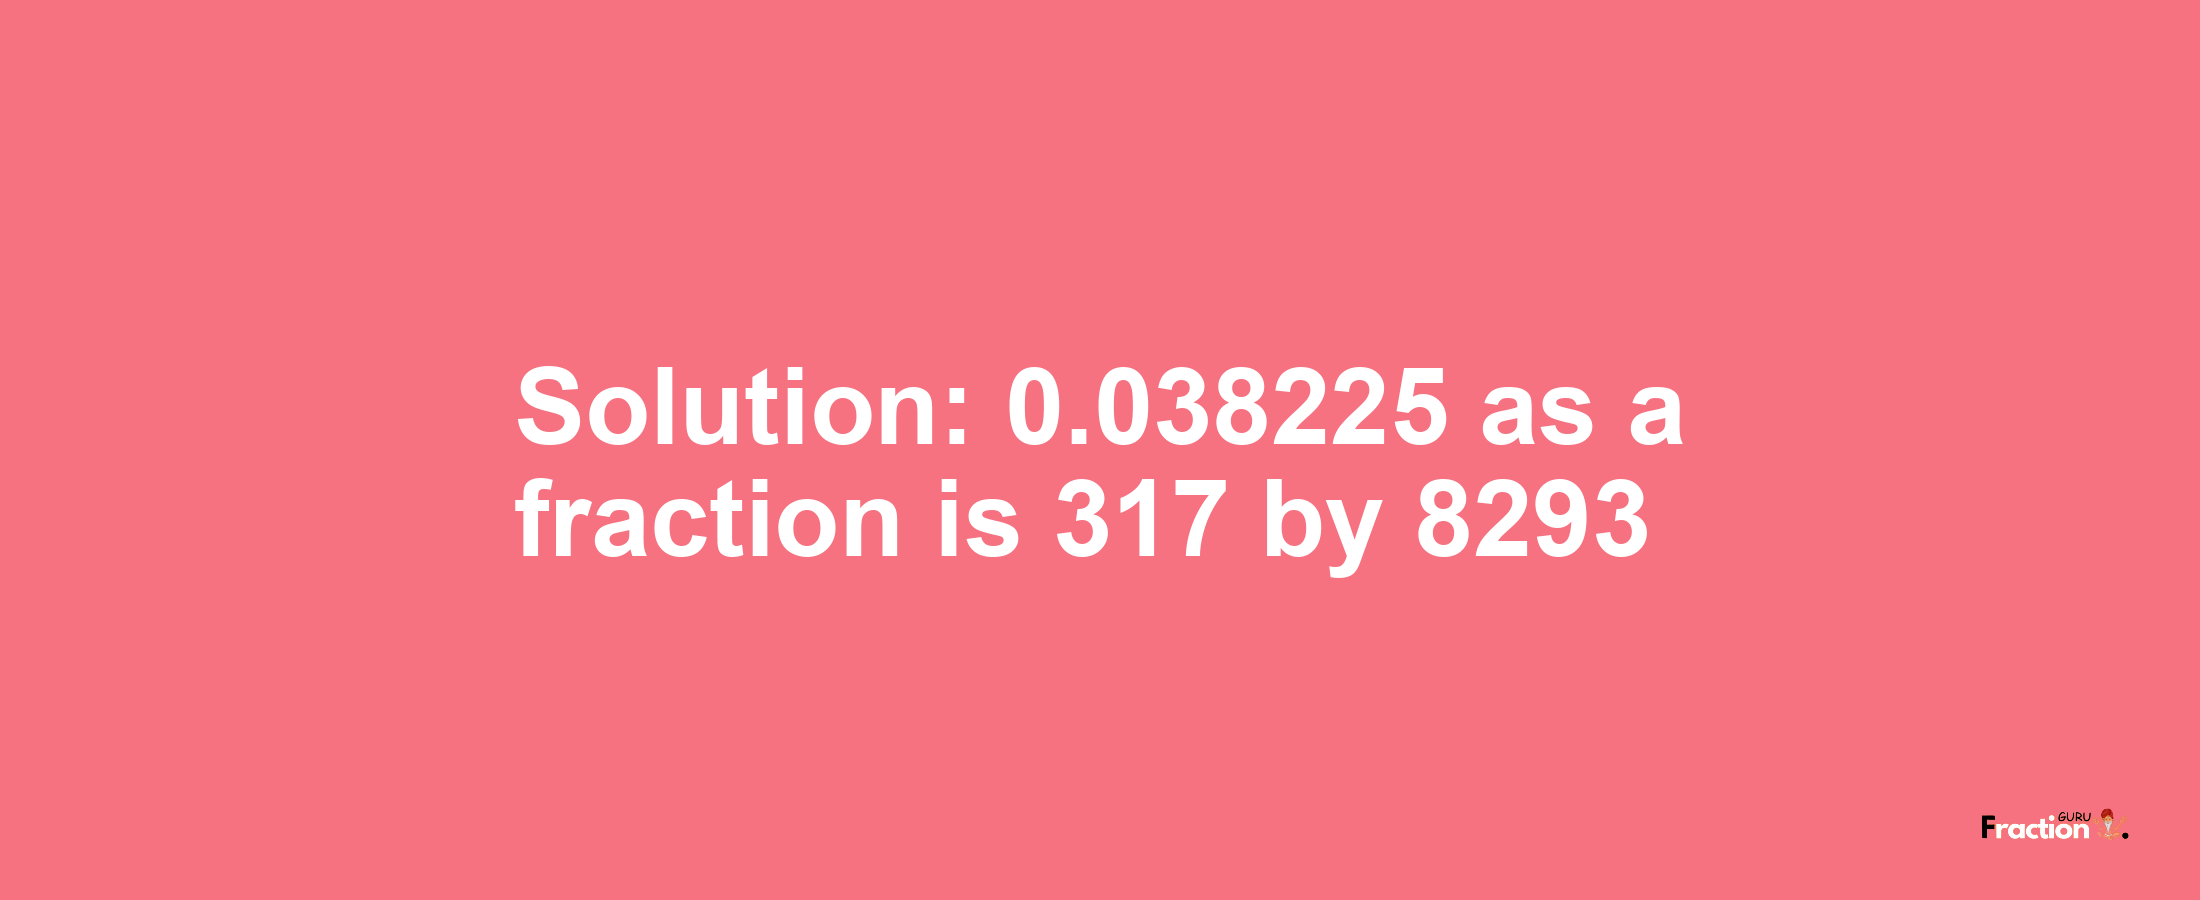 Solution:0.038225 as a fraction is 317/8293